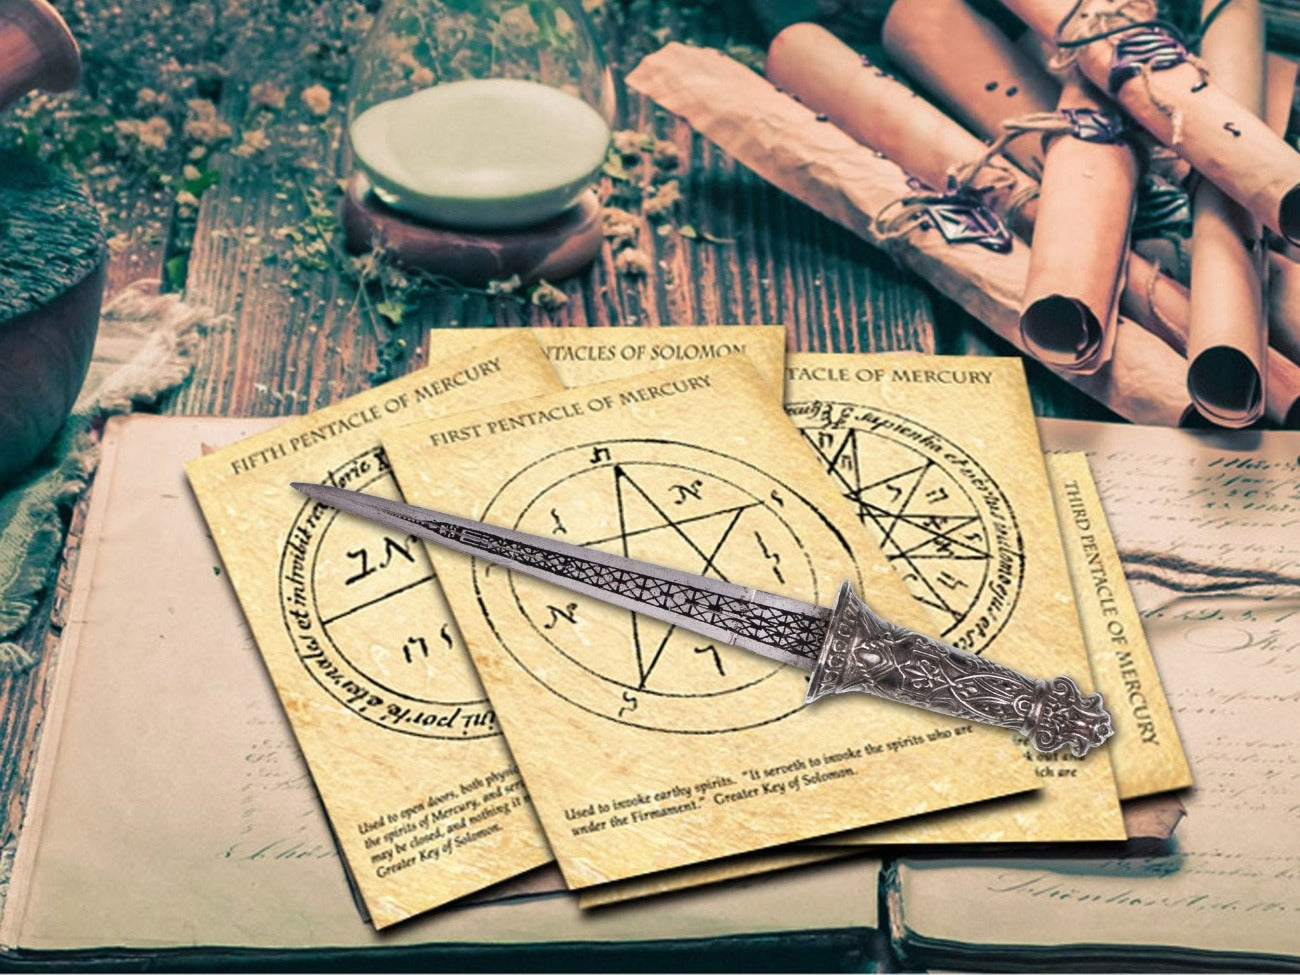 Mercury Pentacles of Solomon, five pages Key of Solomon, occult grimoire download for Book of Shadows or spellbook.